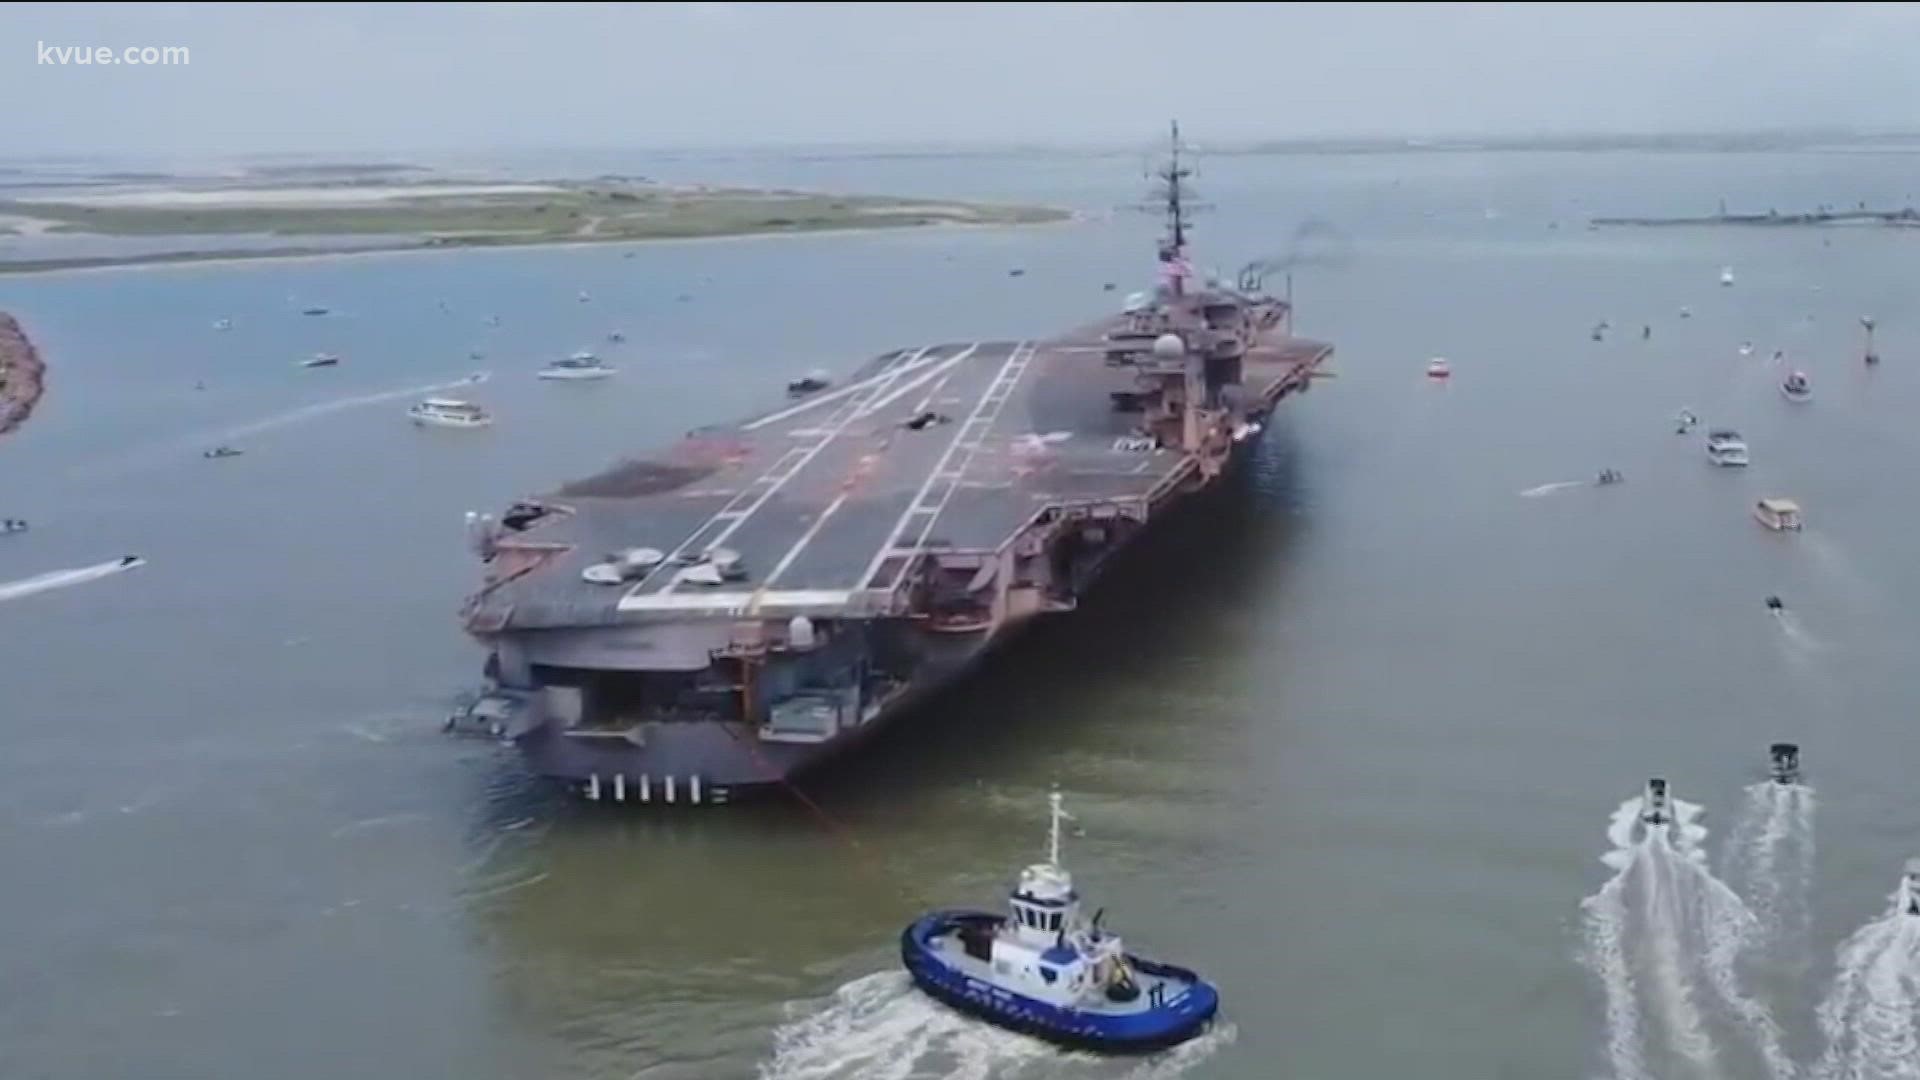 The historic U.S. carrier will now have its metal sold off for scrap by a company in Texas.